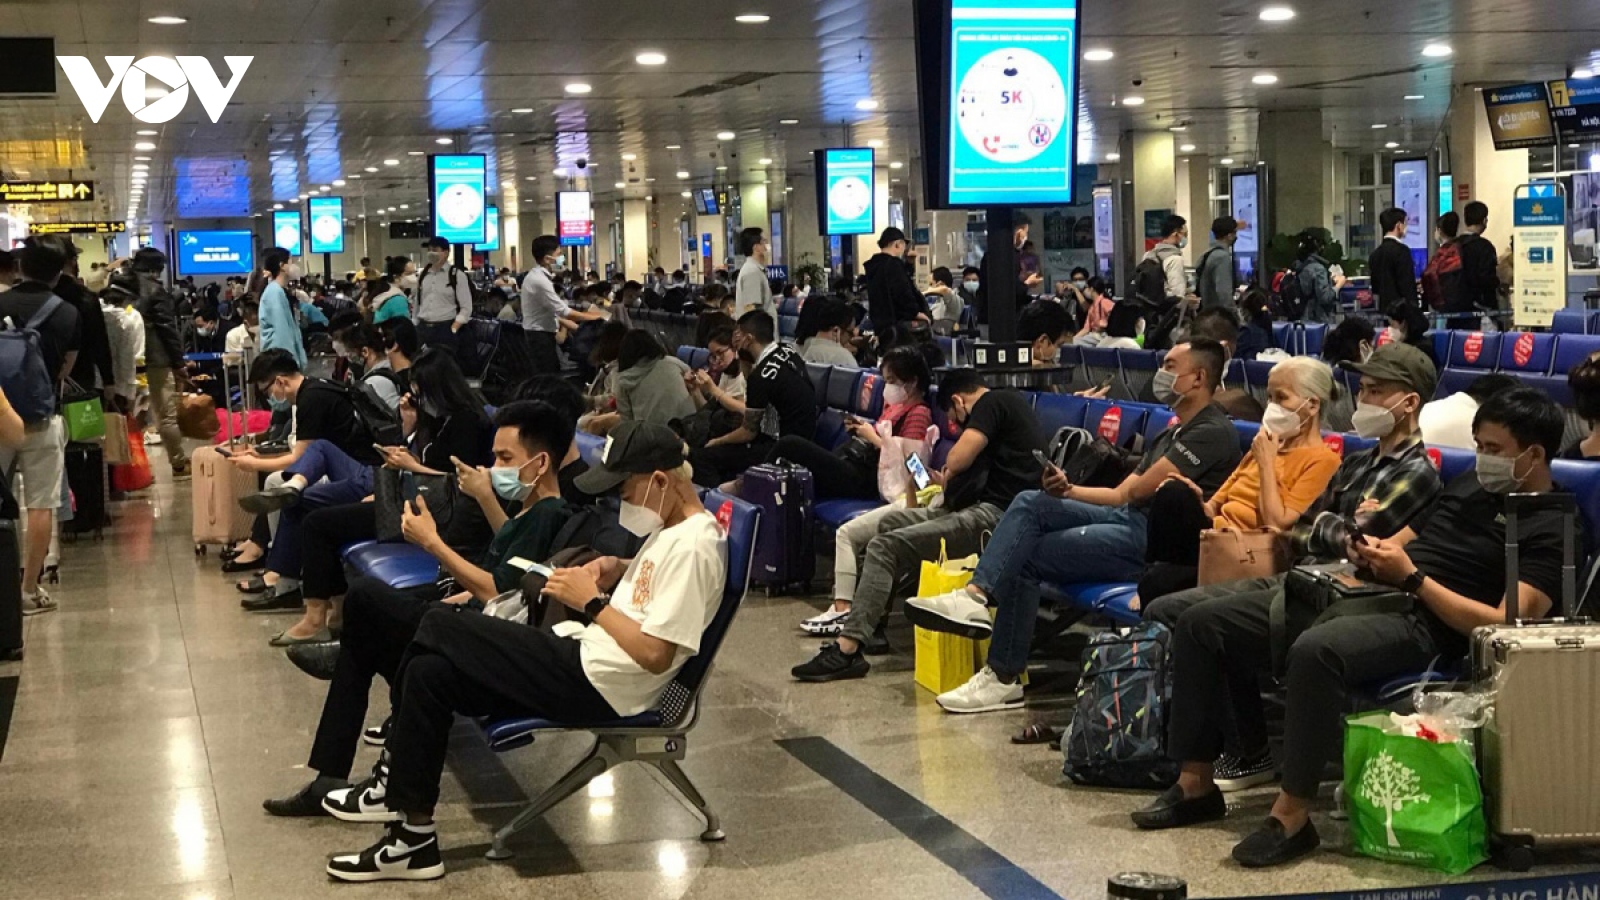 Two major airports serve 1.2 million passengers during five-day holiday